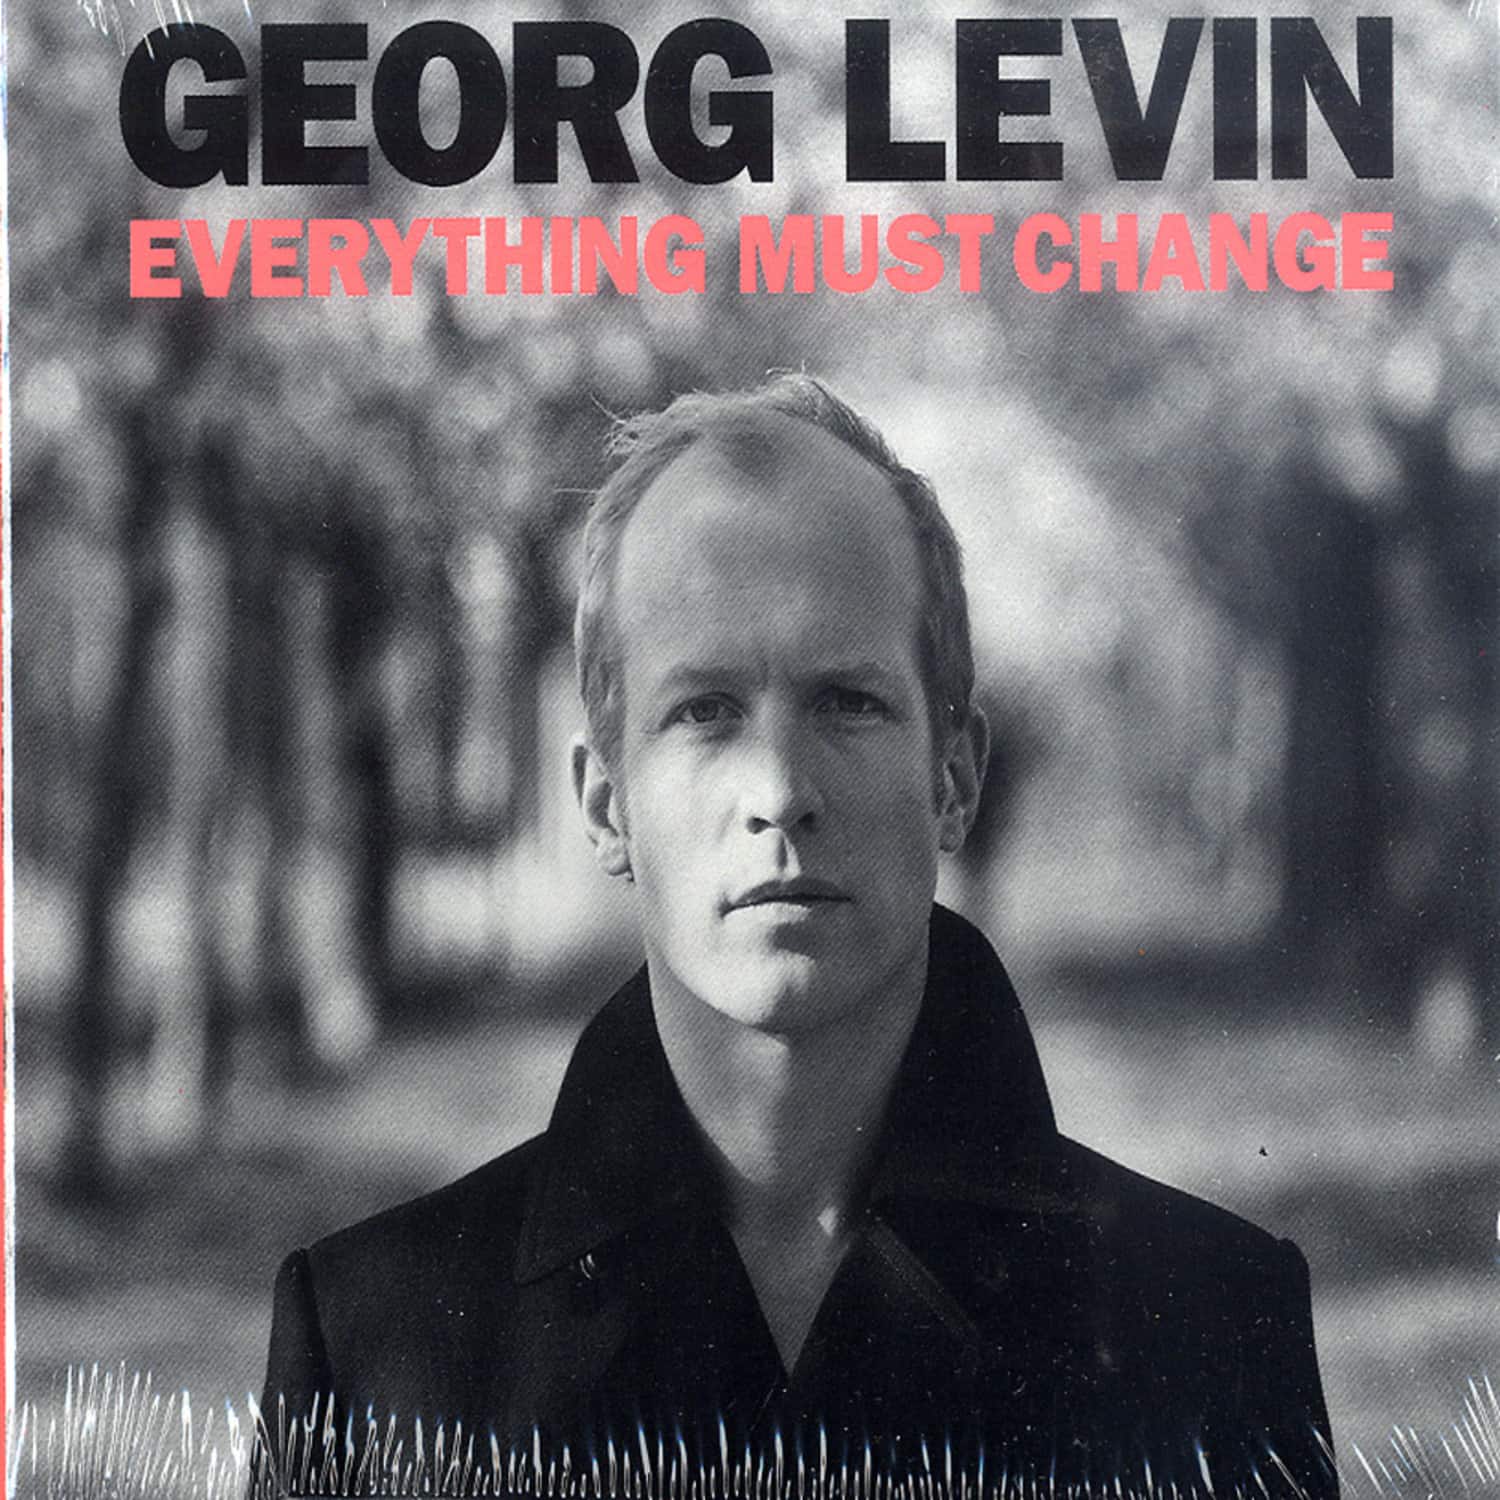 Georg Levin - EVERYTHING MUST CHANGE 